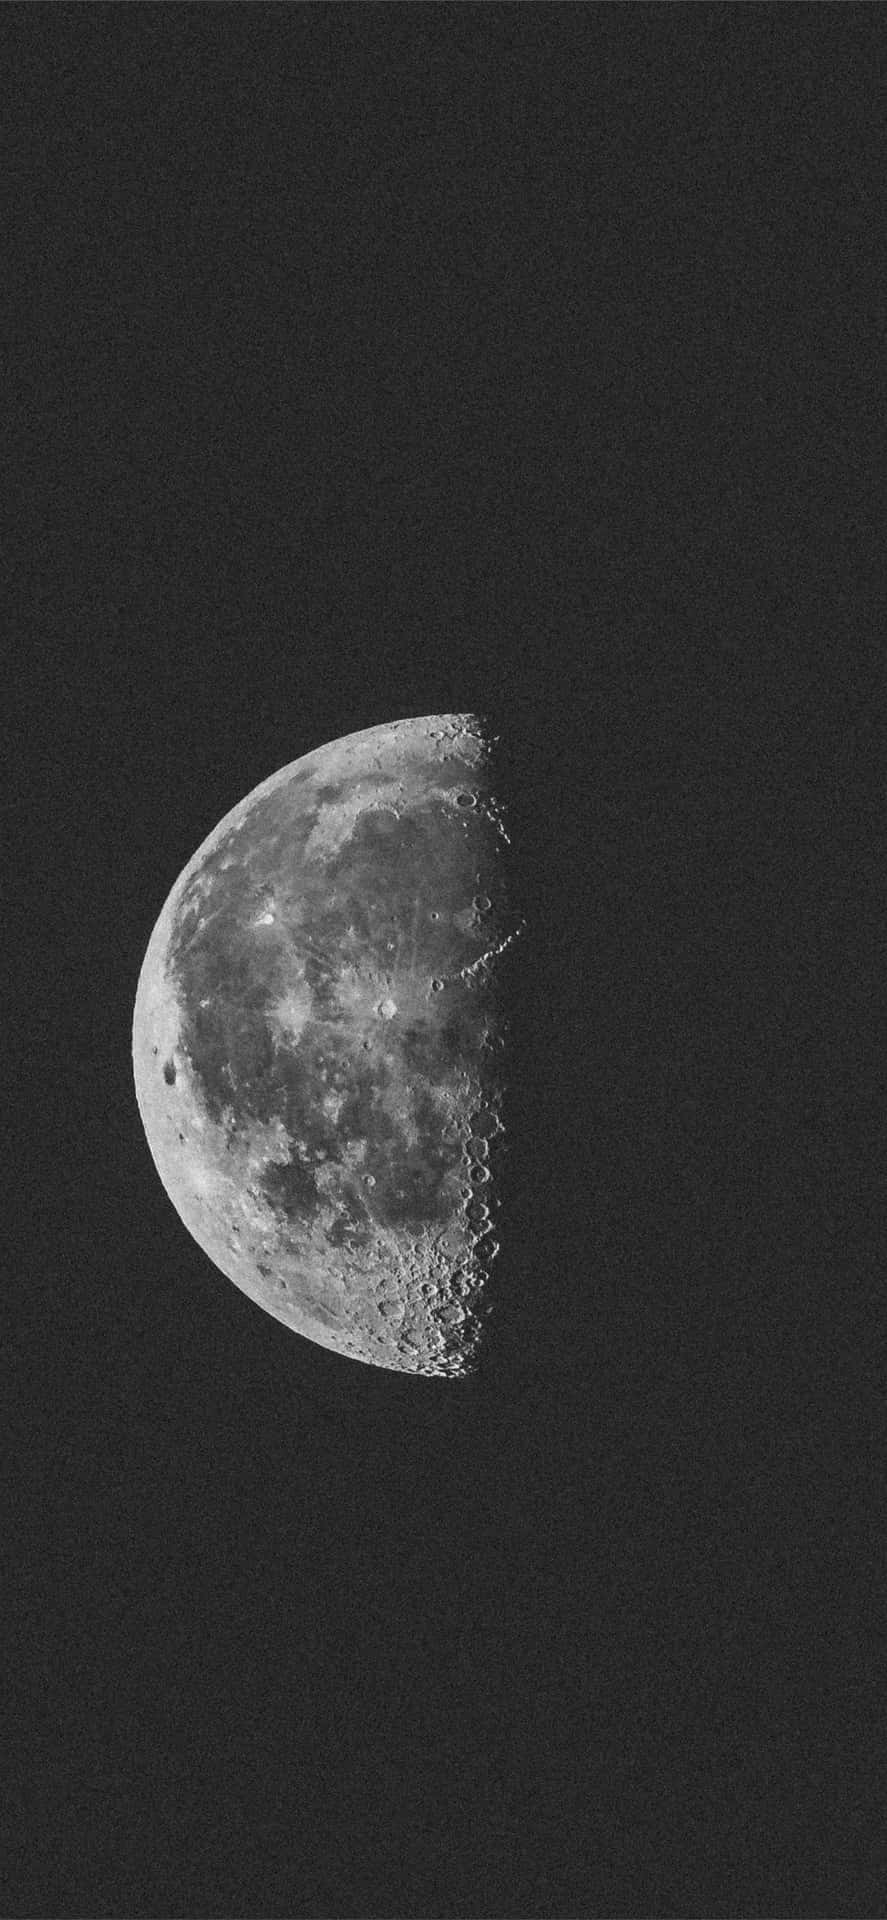 A Black And White Photo Of The Moon Background